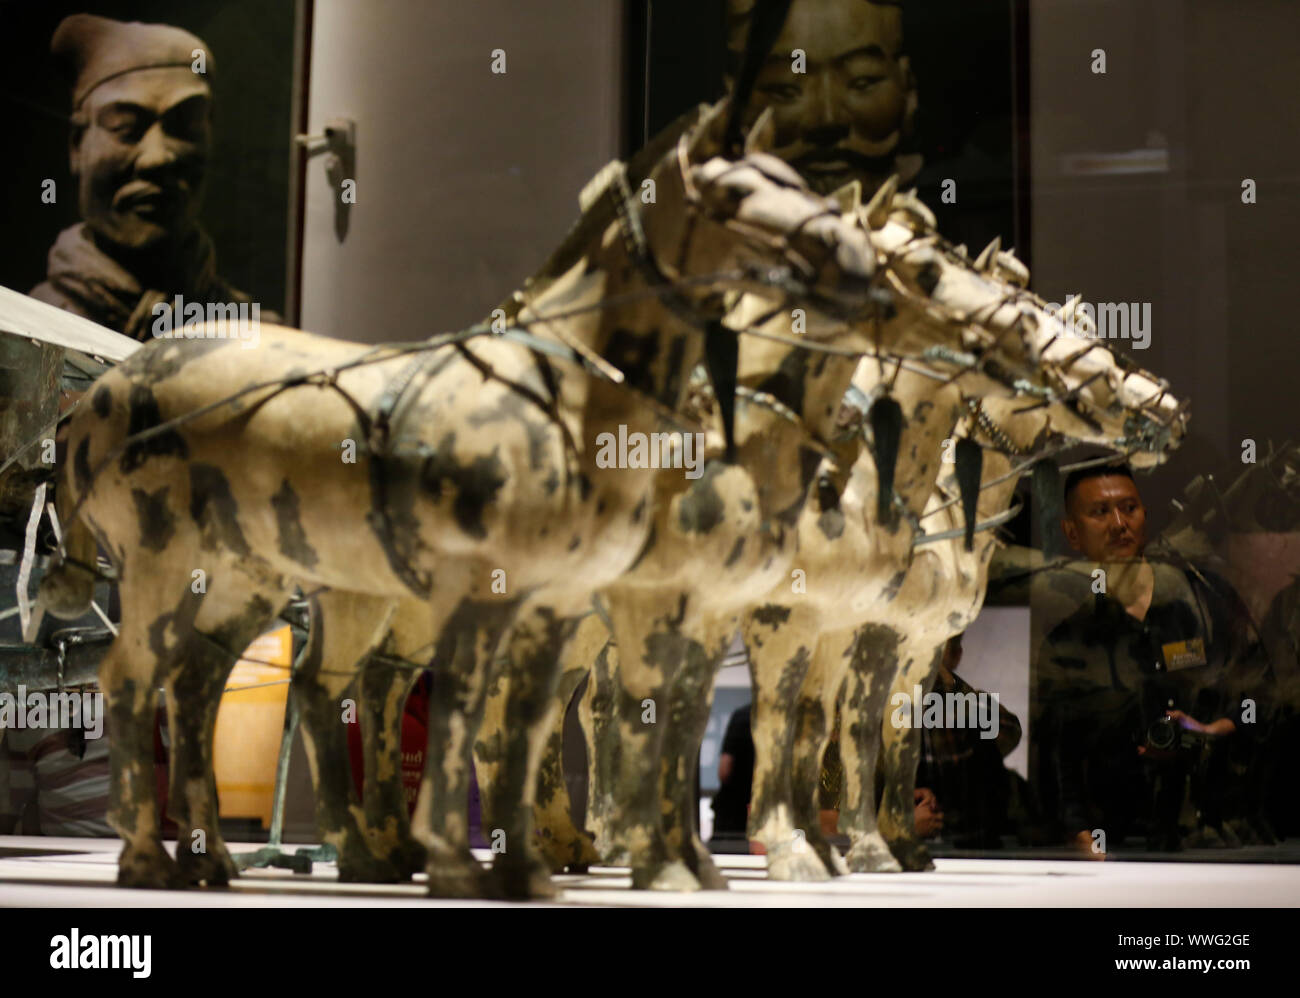 Bangkok, Thailand. 15th Sep, 2019. Visitors seen during the exhibition of Qin Shi Huang, the First Emperor of China and Terracotta Warriors at the National Museum of Thailand in Bangkok.The presentation of the world-class exhibition entitled ' Qin Shi Huang: The First Emperor of China and Terracotta Warriors' marks an unprecedented phenomenon at the Thai museum arena. They team up gather 86 items of important artefacts (133 pieces) aged over 2,200 years from 14 leading museums in China, and all antiquated objects are on display at the National Museum of Thailand. Credit: SOPA Images Limited/Al Stock Photo